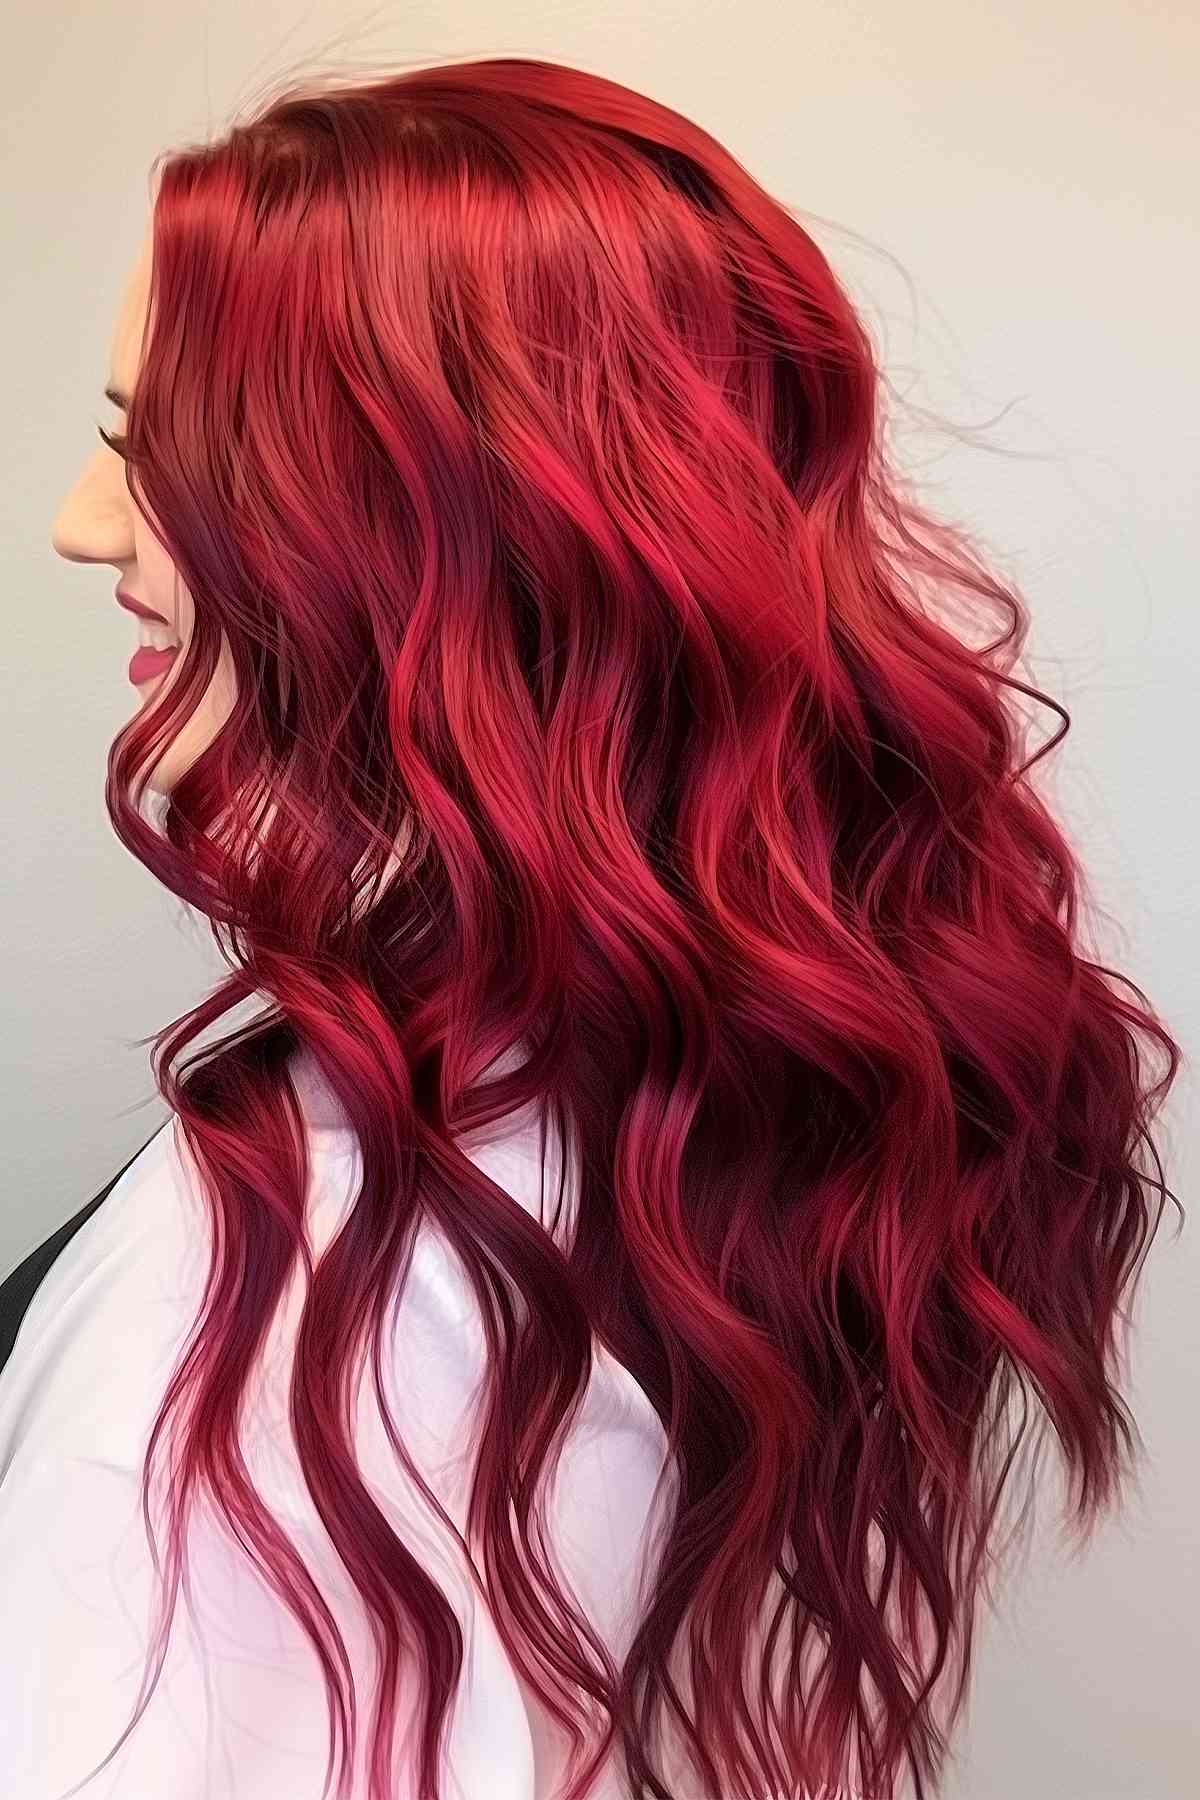 Bright cherry red hair with voluminous curls for a bold look on long hair.